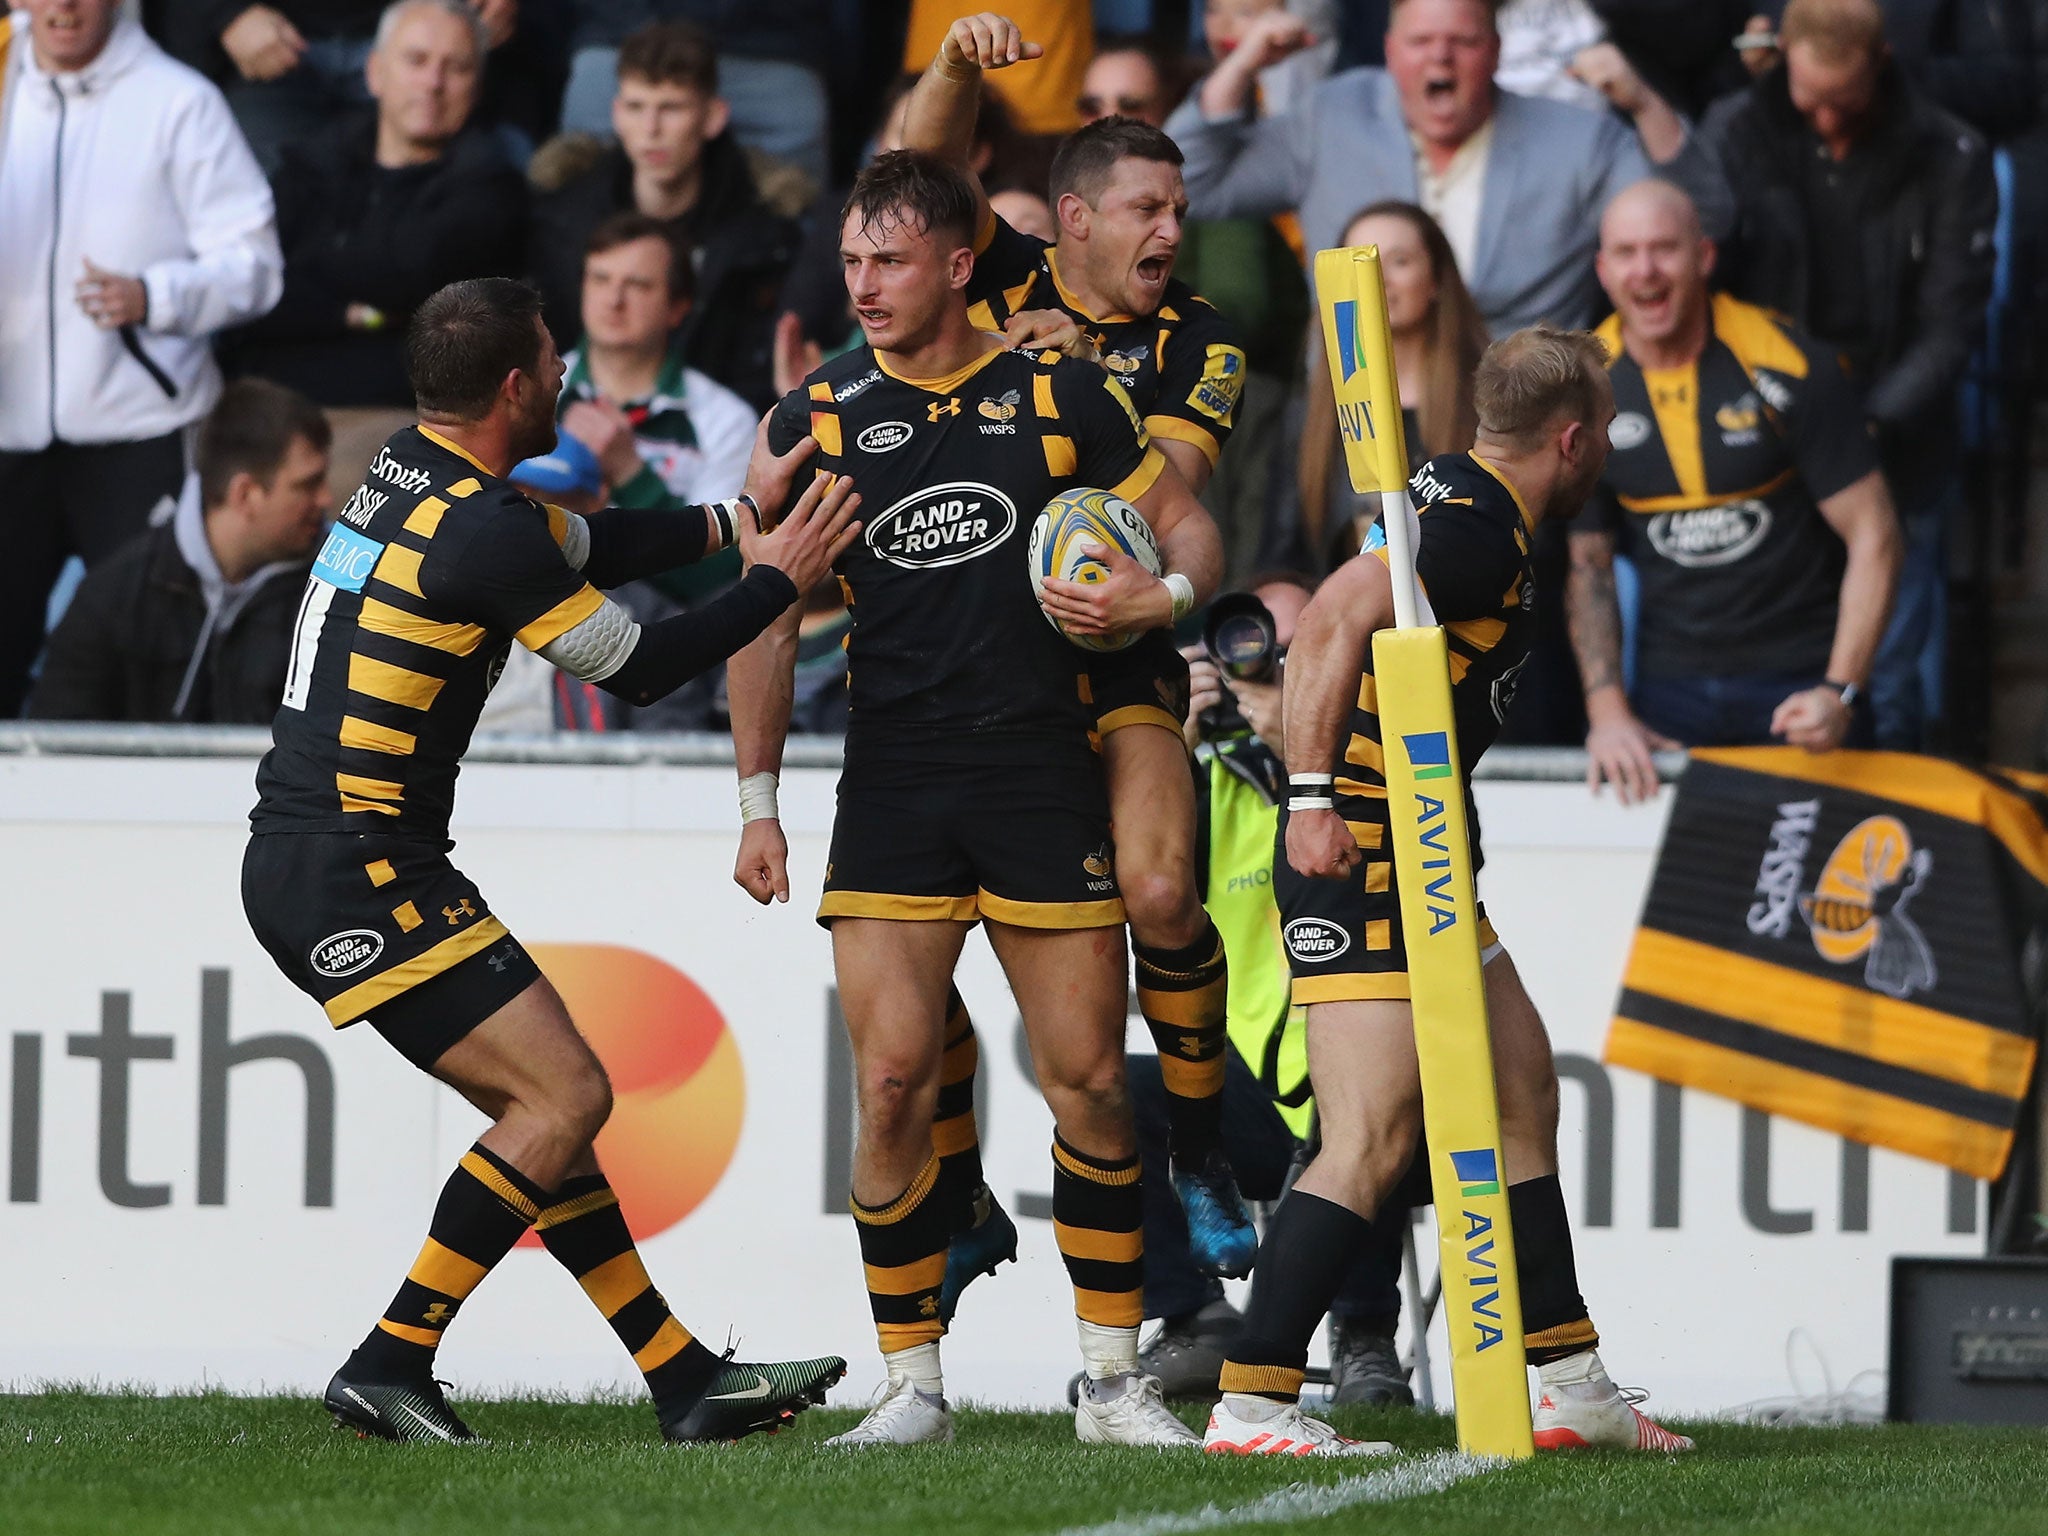 Wasps will face Exeter Chiefs in the Premiership final after defeating Leicester Tigers